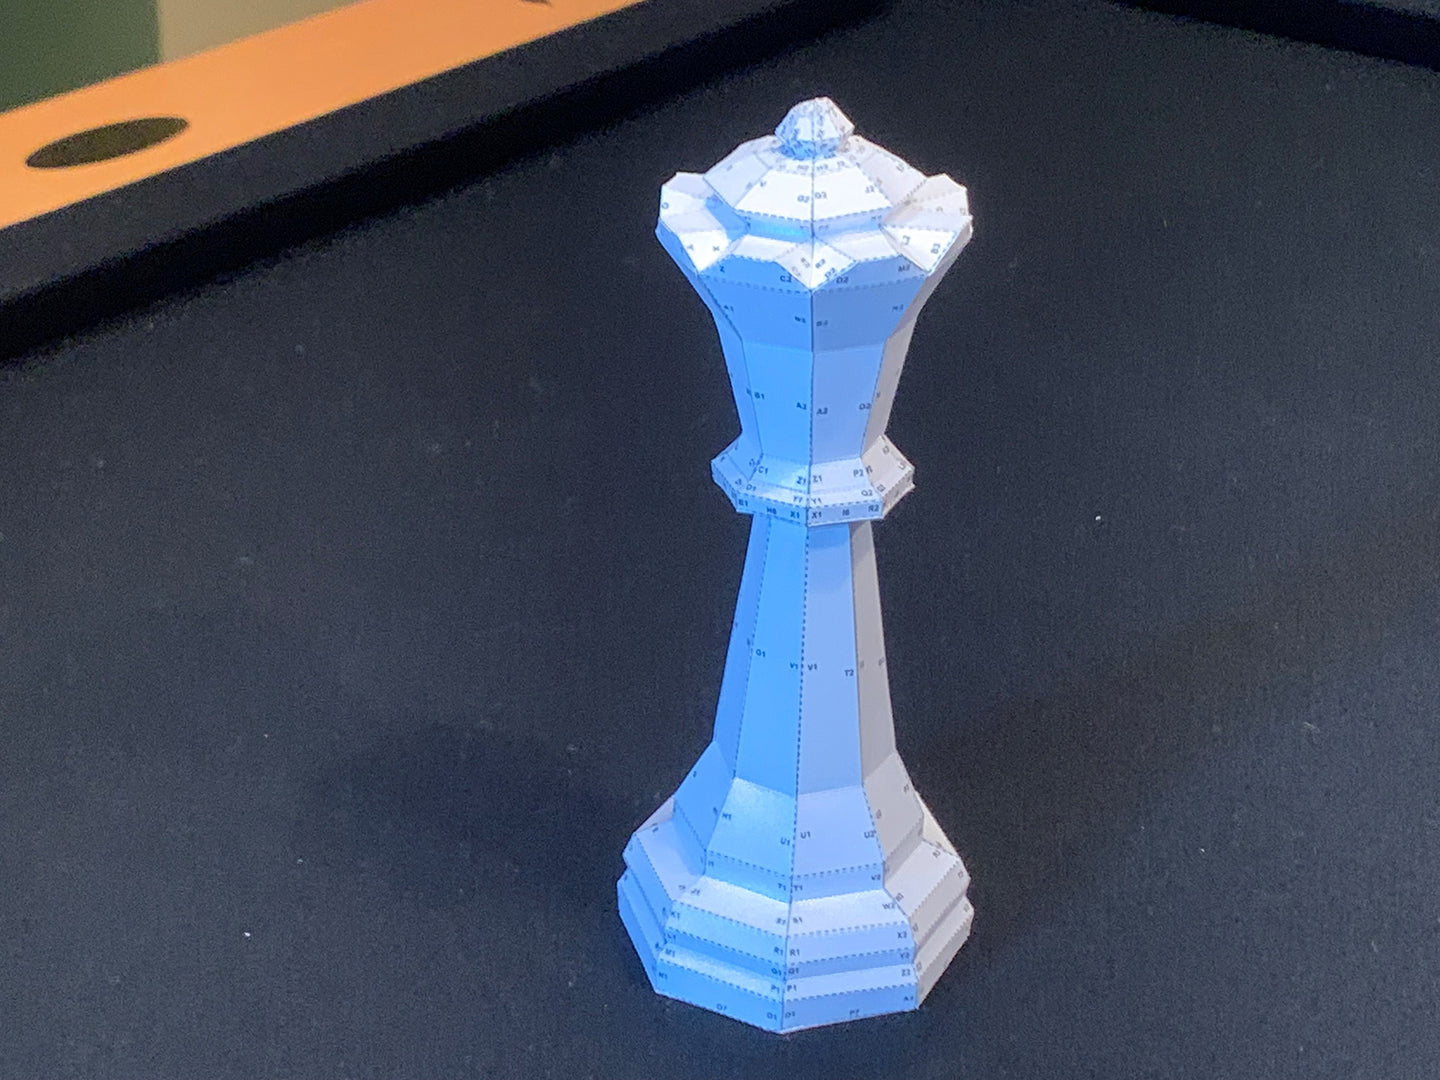 Giant Chess Piece - QUEEN DIY Low Poly Paper Model Template, Paper Craft